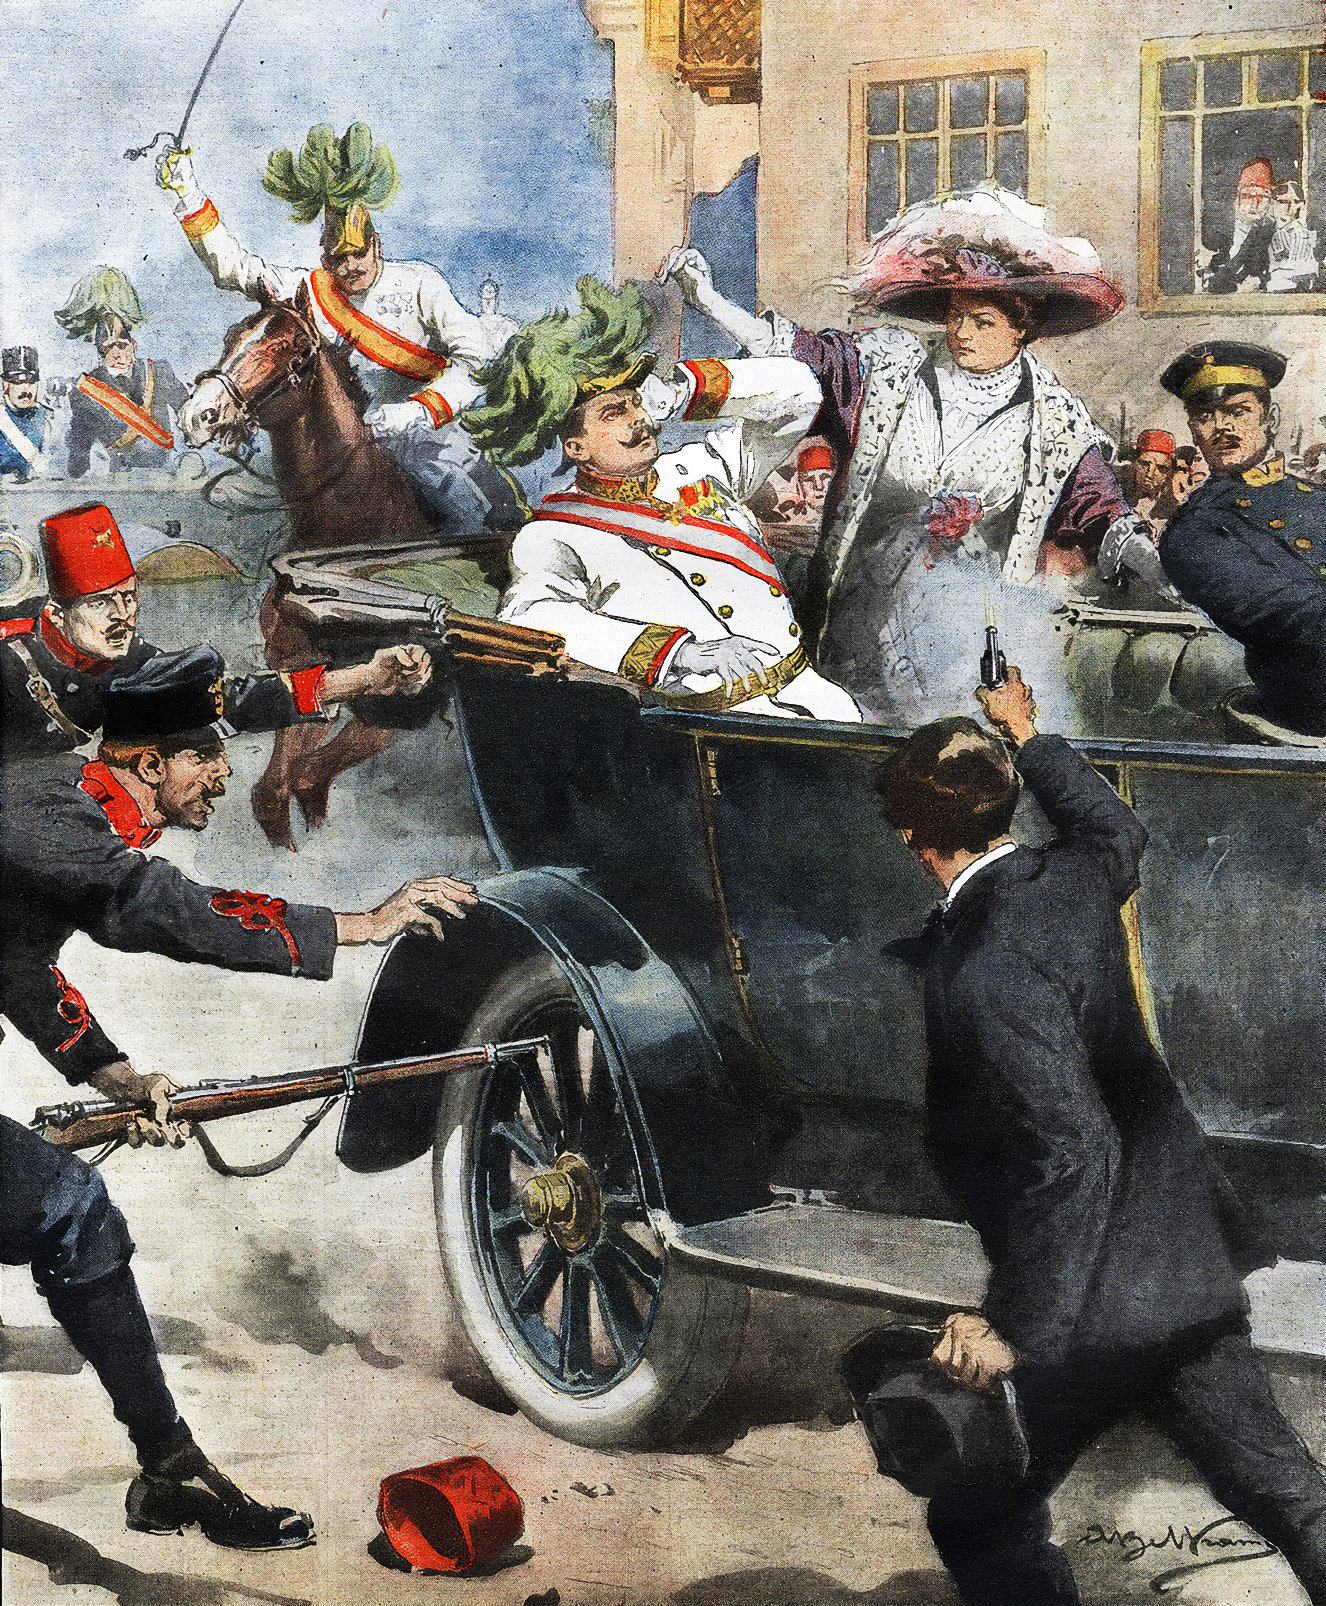 A historical illustration depicting the moment of the assassination of Archduke Franz Ferdinand and his wife in Sarajevo, 1914. The Archduke, wearing a white military uniform, is slumped back in an open-top car, next to his wife who is dressed in a white gown and a wide-brimmed hat. A man in the foreground aims a pistol at them, while another figure reaches out to the car. Soldiers and onlookers are in the background, conveying a scene of chaos and shock.